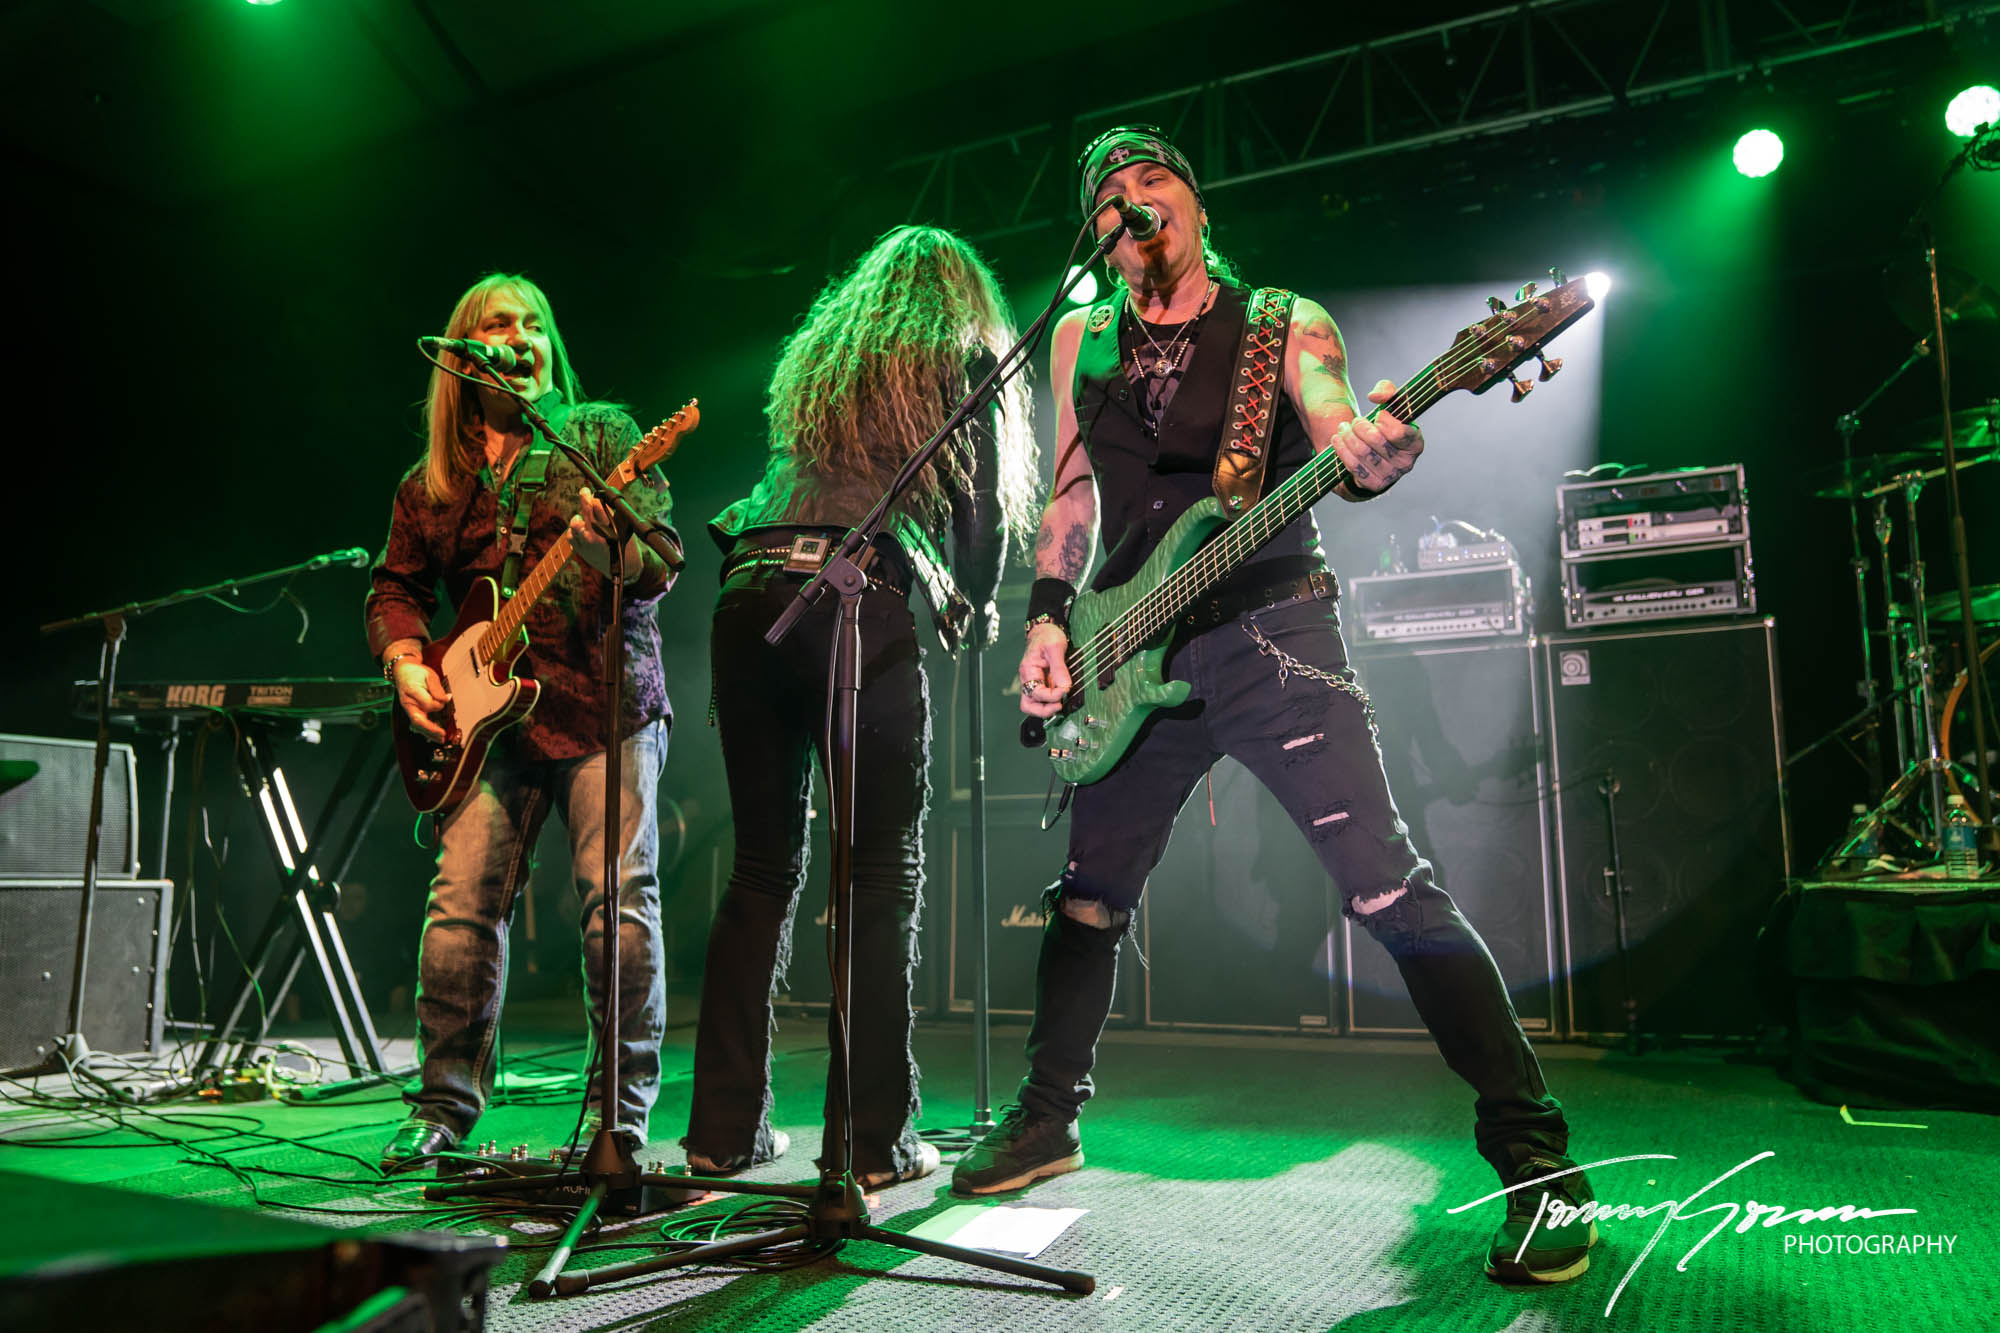 LIVE REVIEW: Great White and Slaughter - Grand Casino Hinckley, Hinckley, MN - The Rockpit 2000x1340